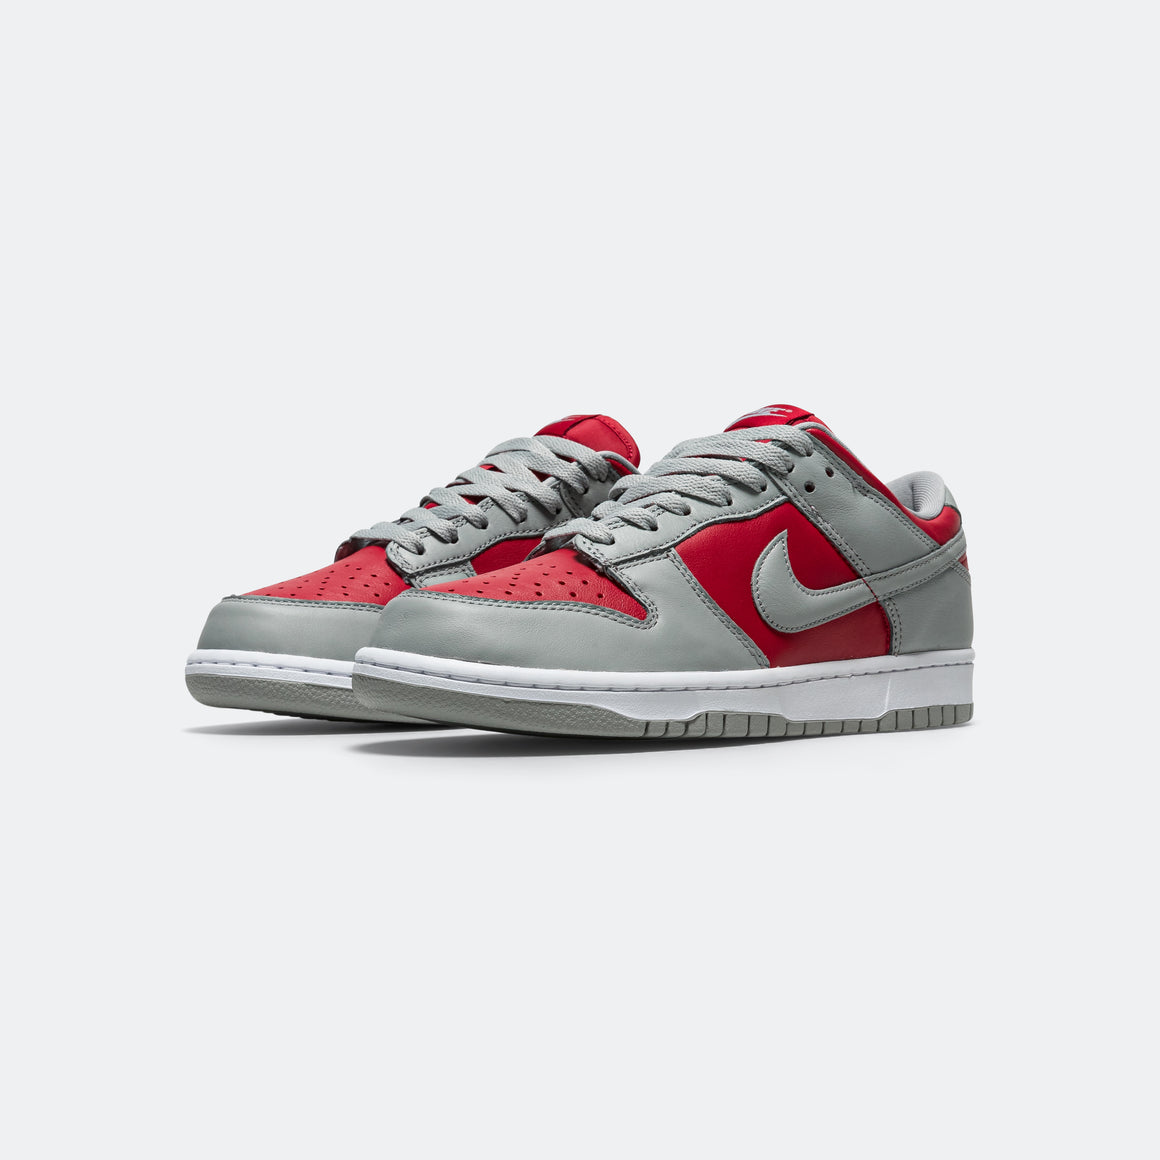 Dunk Low CO.JP - Varsity Red/Silver-White